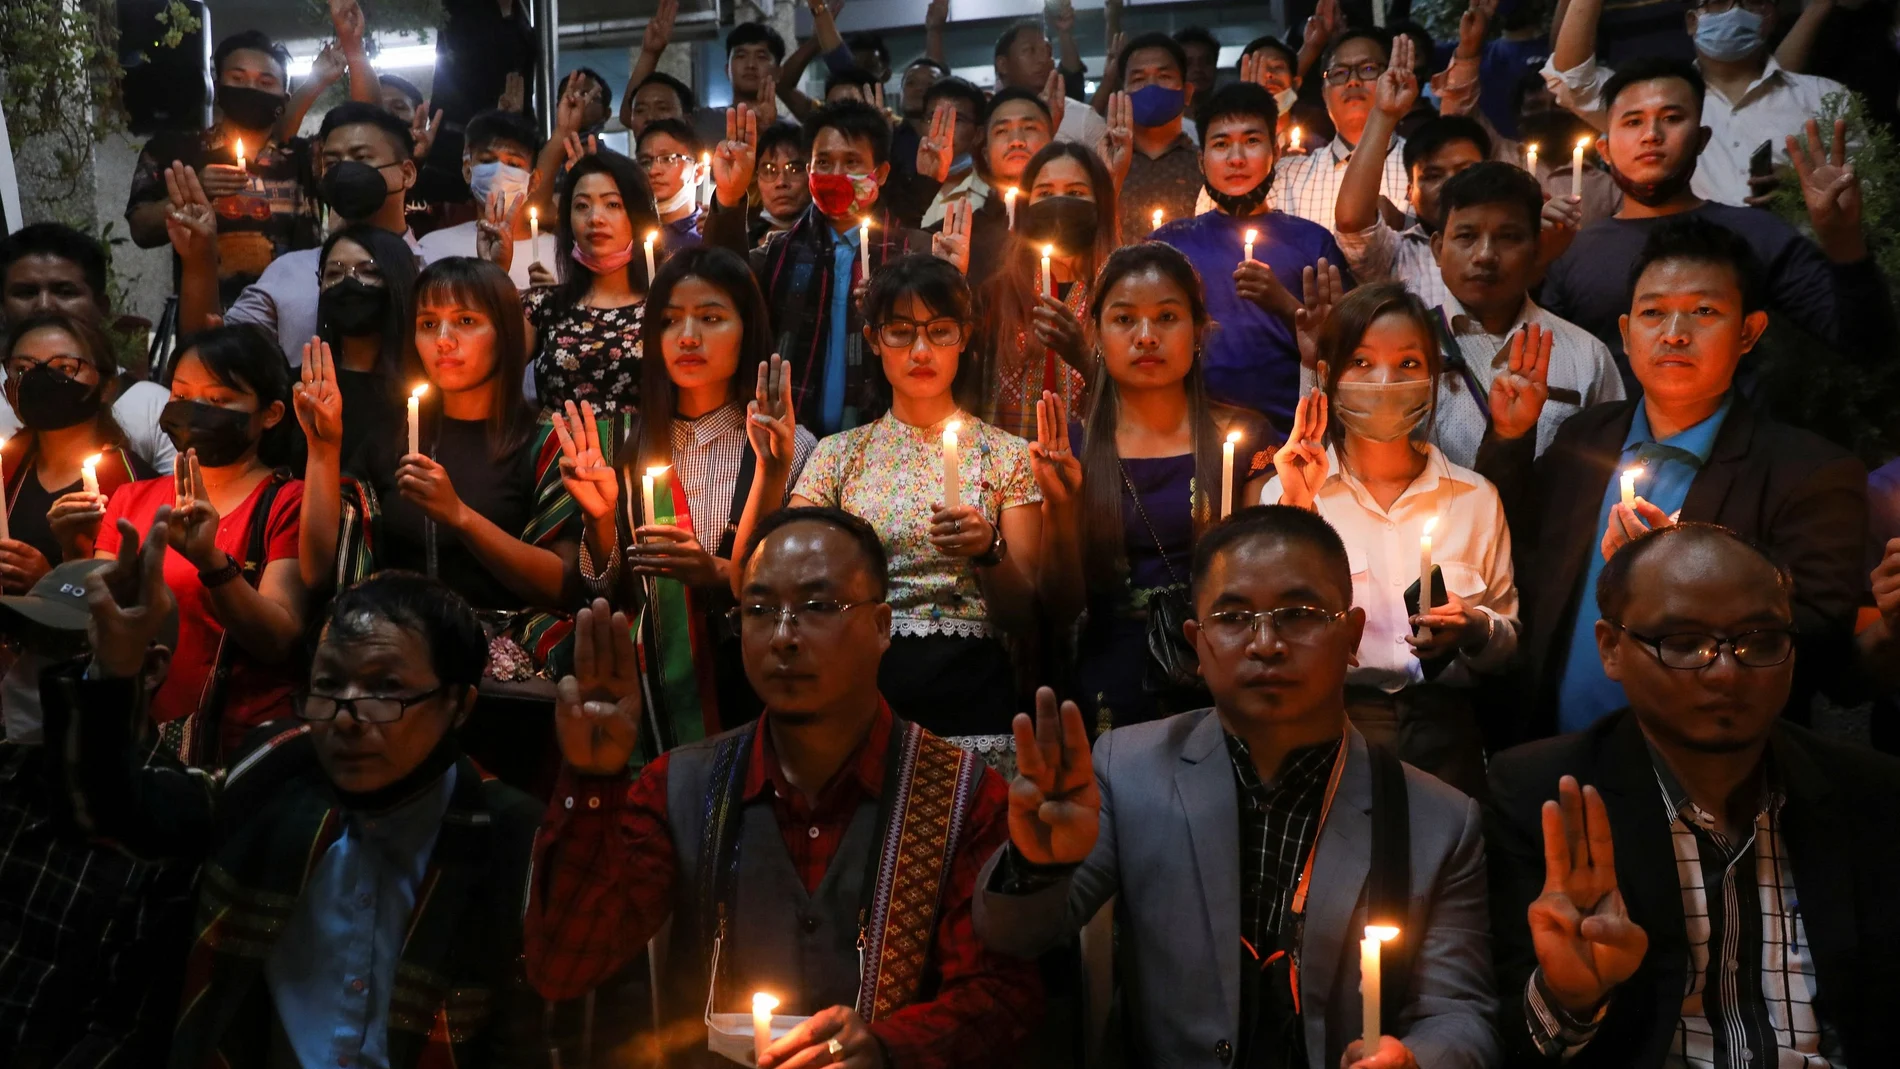 Myanmar citizens living in India and members of Mizo Zirlai Pawl (MZP), a student organisation from India's Mizoram state, hold a candle vigil to pay tribute to people who died in Myanmar after the military coup, in New Delhi, India, March 23, 2021. REUTERS/Anushree Fadnavis